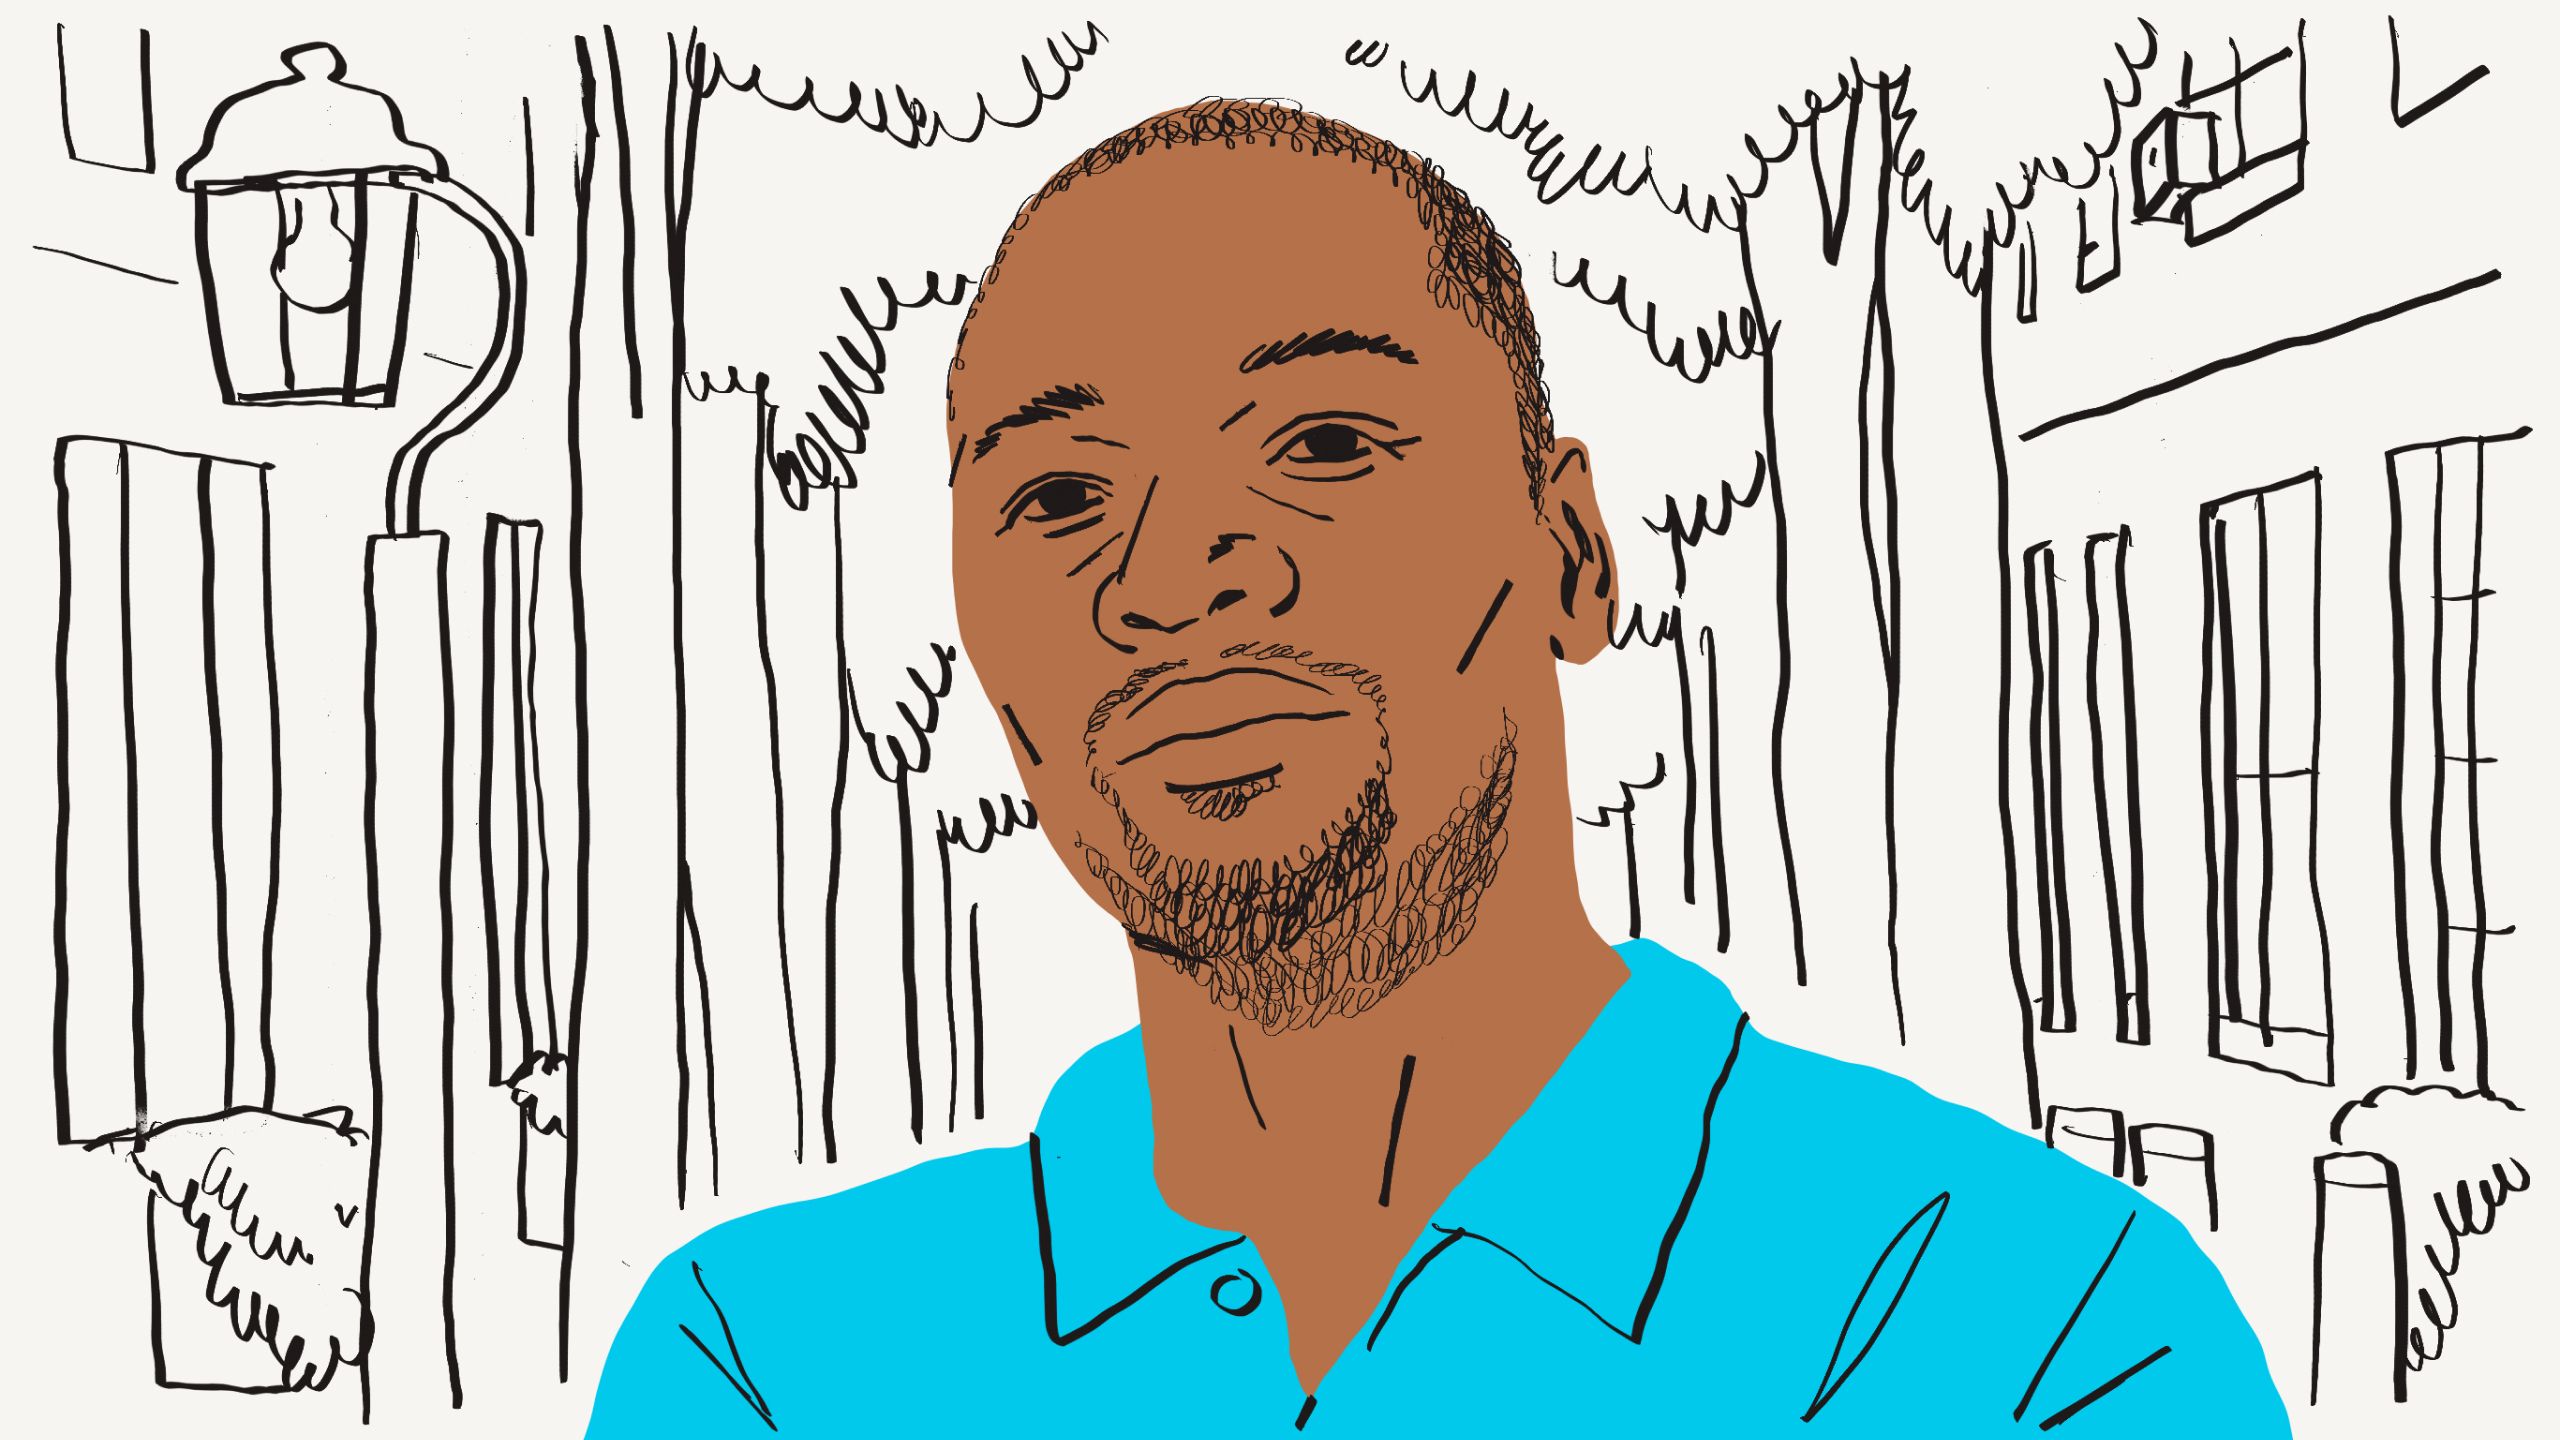 Illustration of a person wearing a turquoise shirt in front of trees